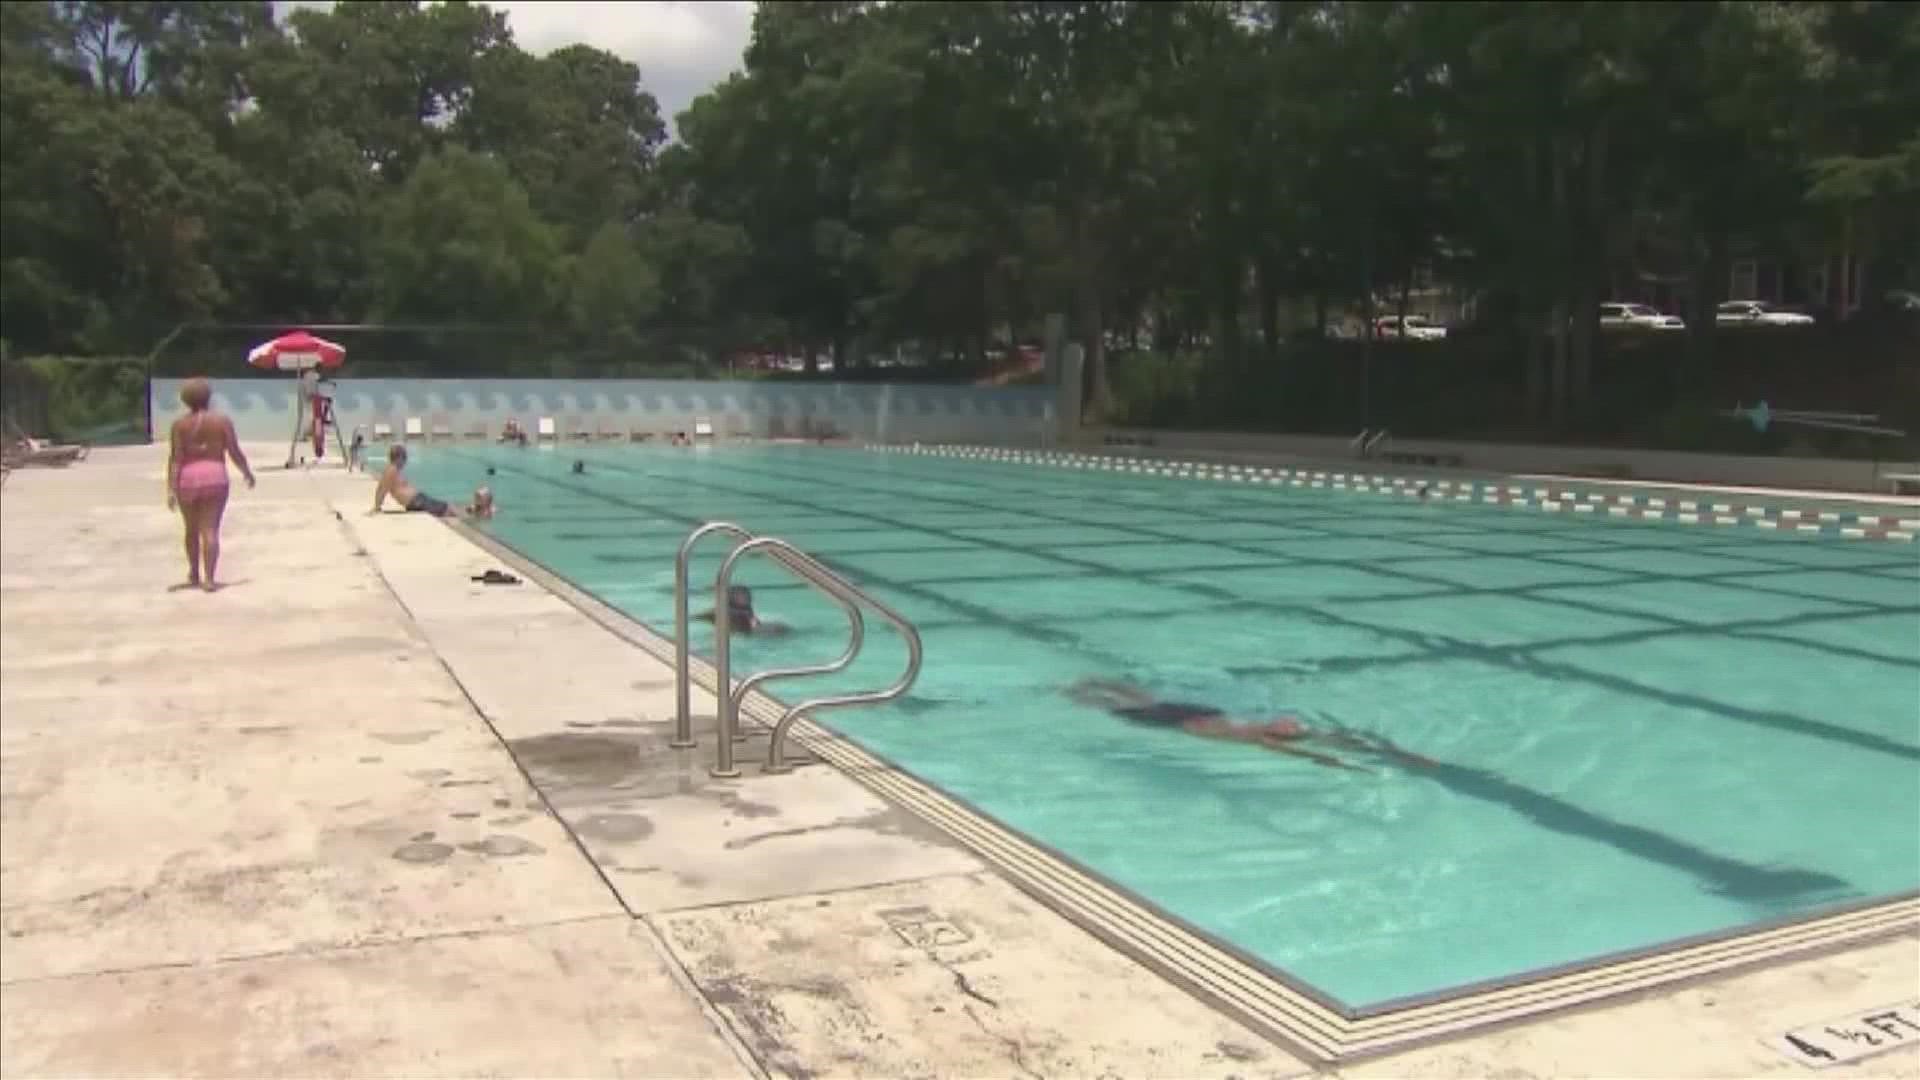 Some of the pools and splash pads run by the city opened just in time for the Memorial Day weekend.